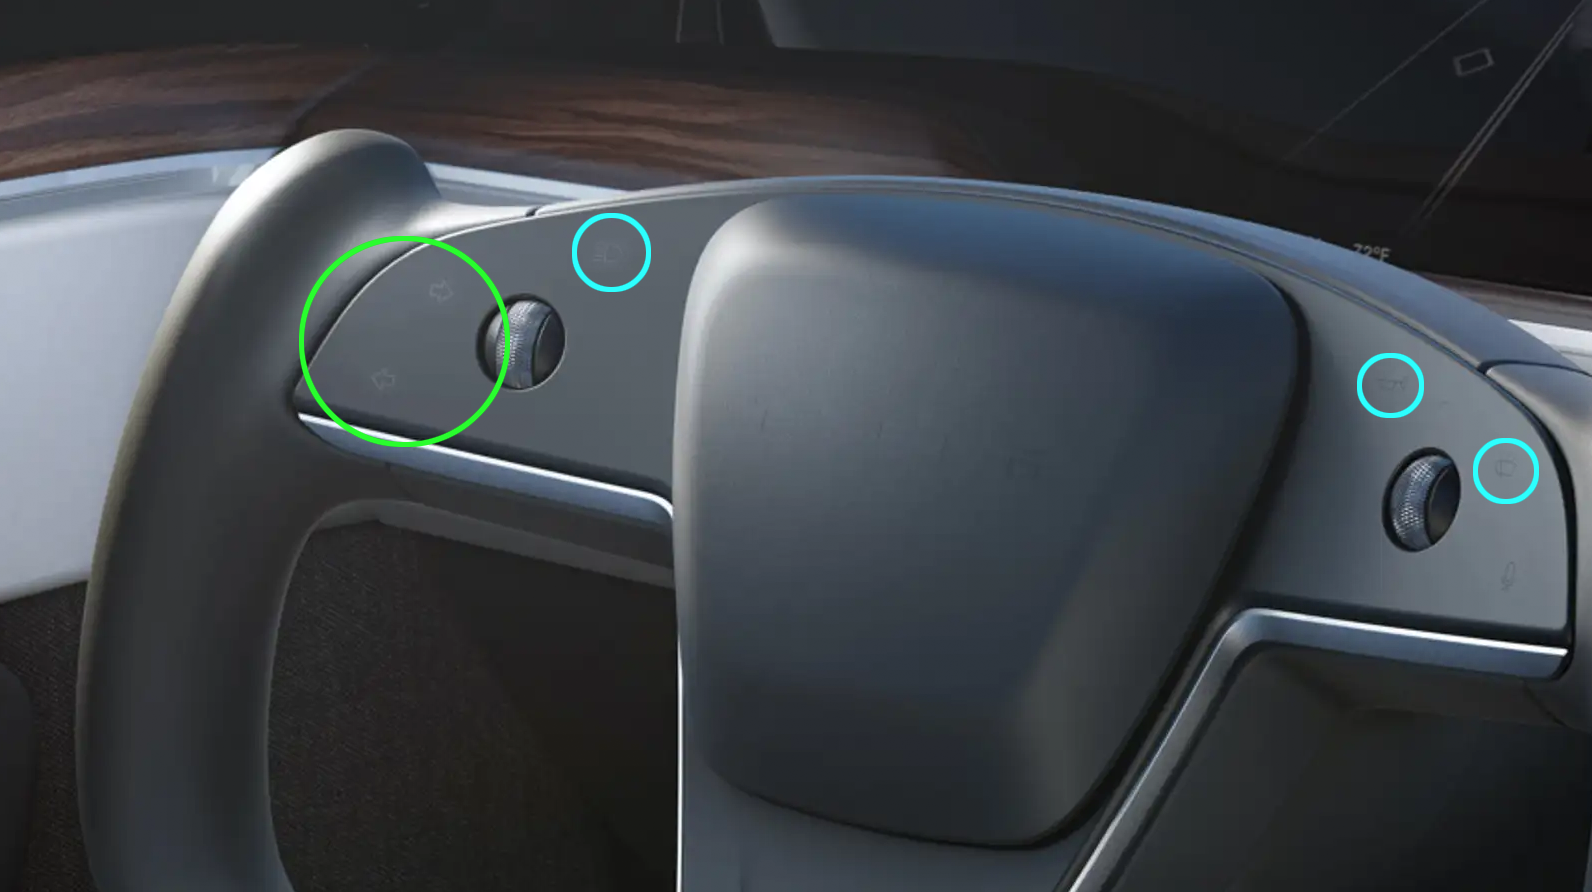 Let’s Bitch About Tesla’s Removal of the Turn Signal Stalk on the Refreshed Model S